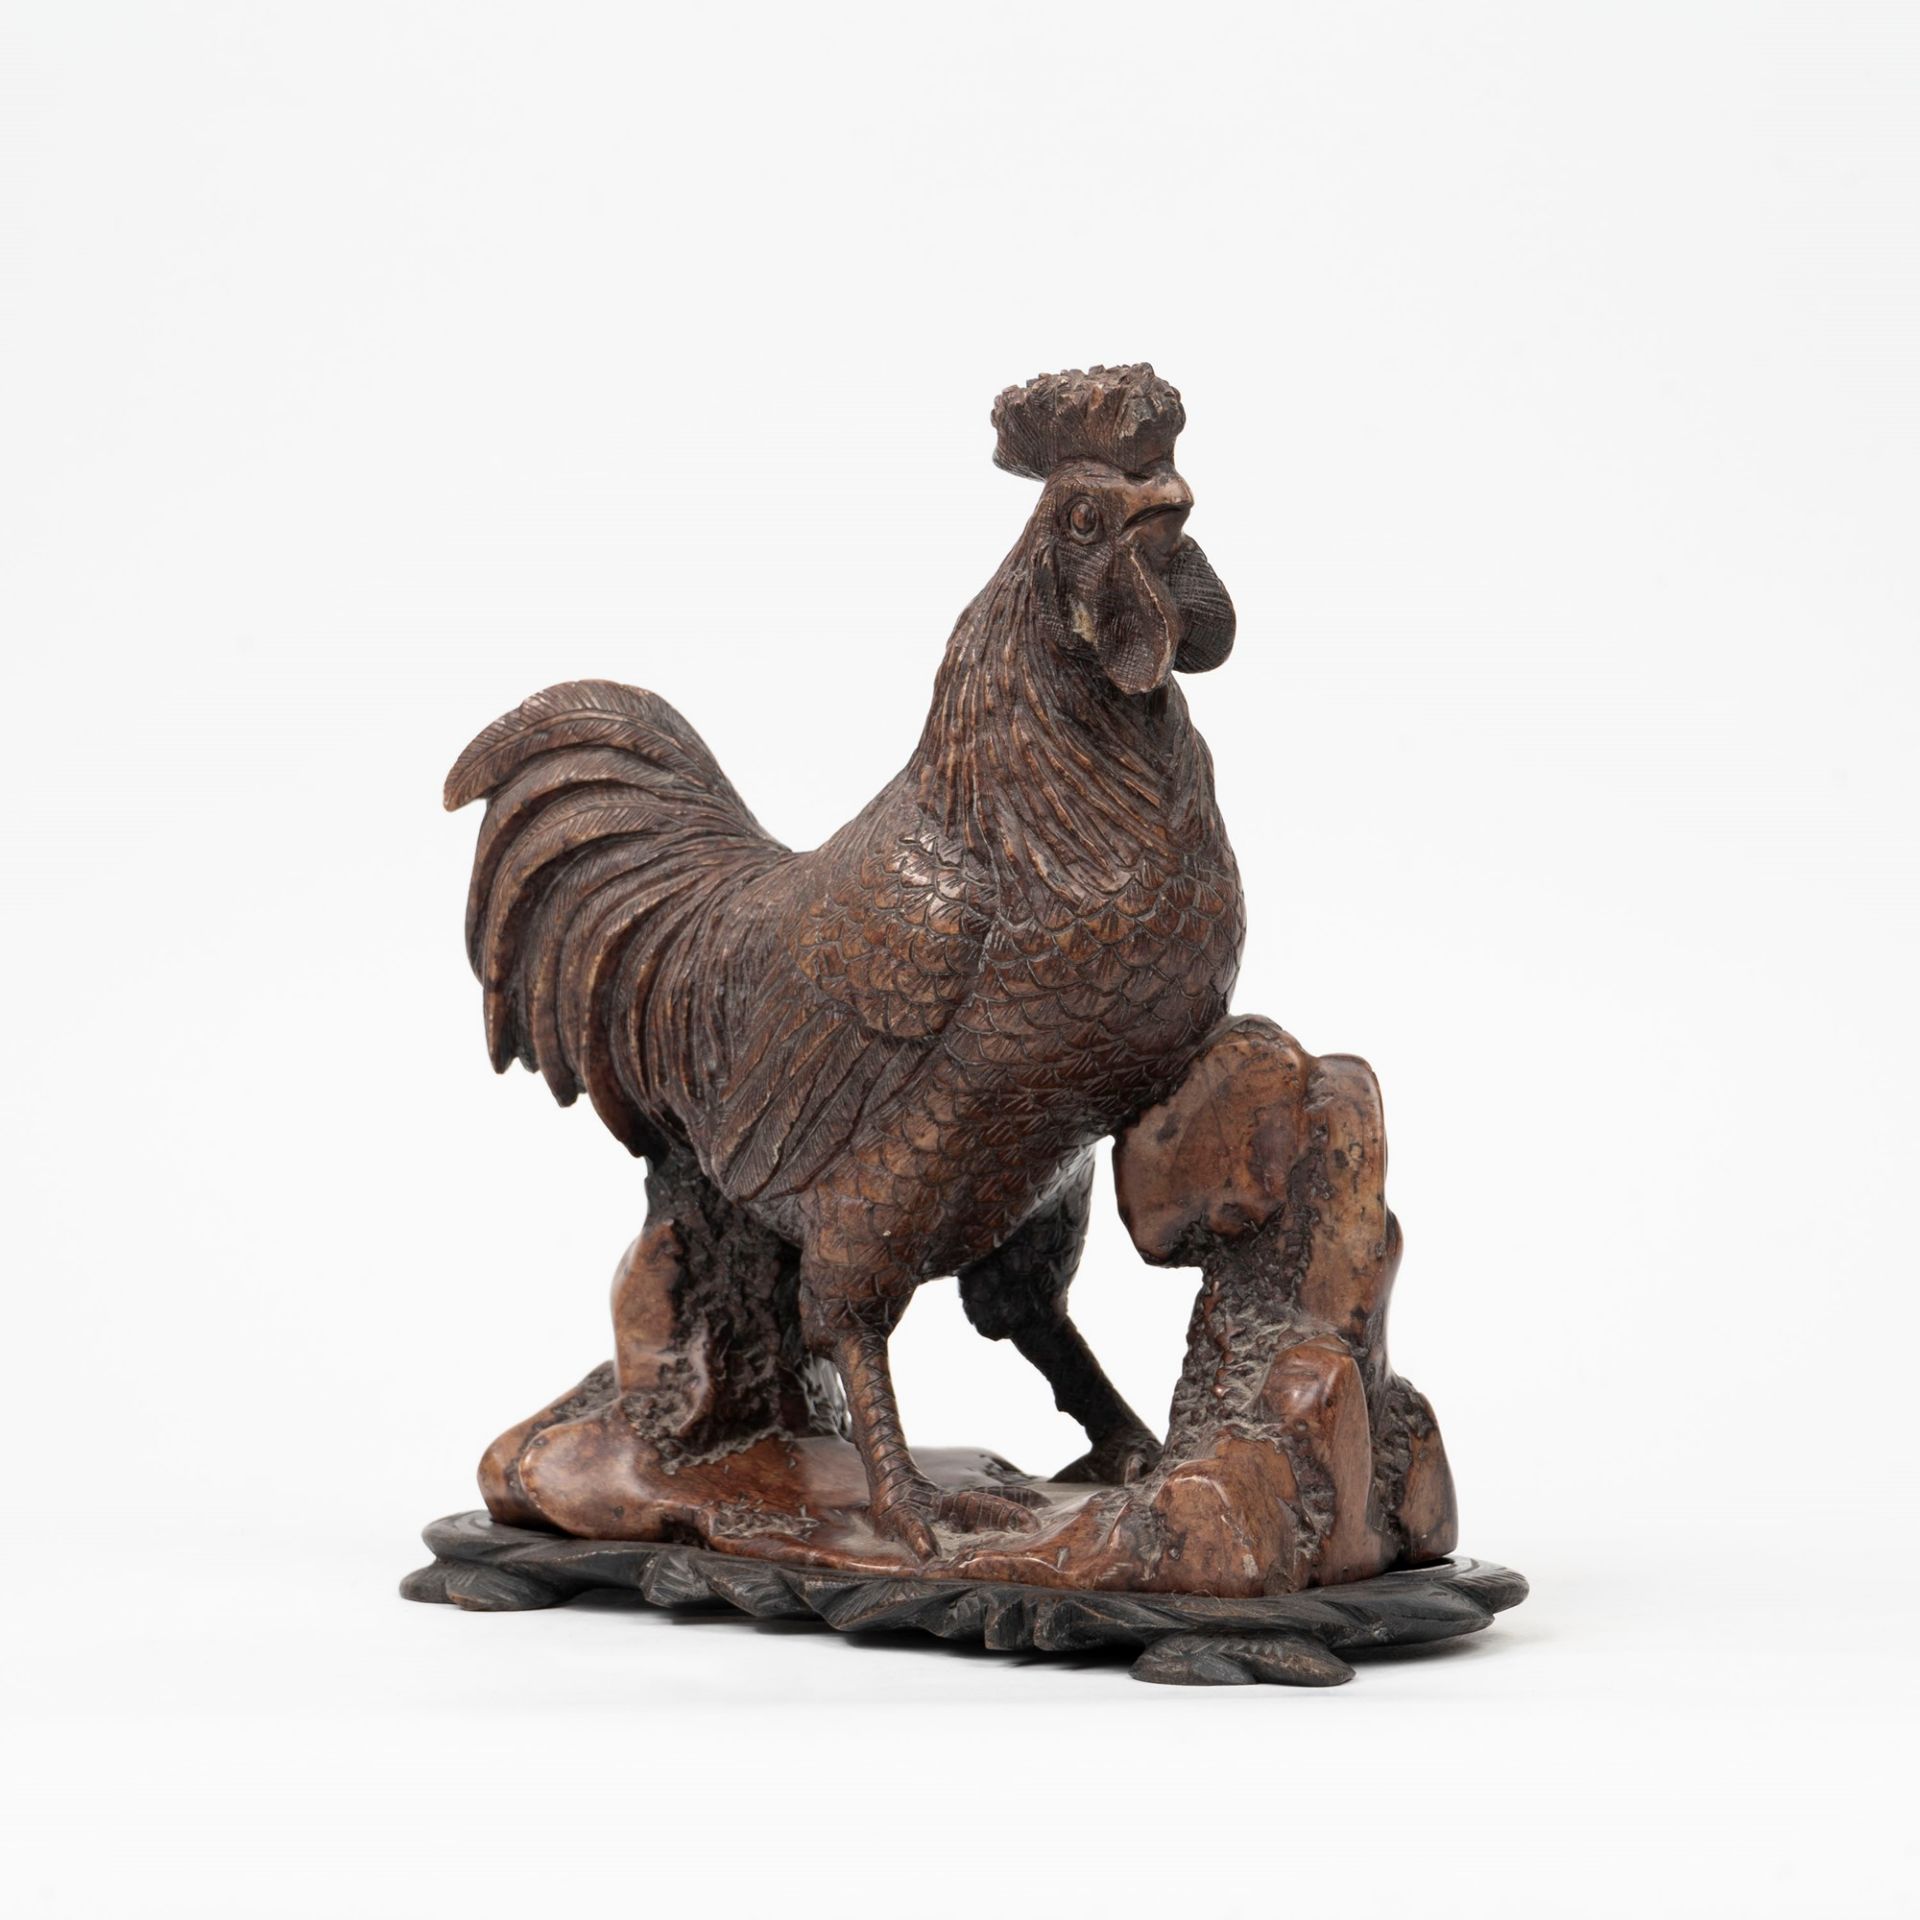 Soapstone sculpture depicting a rooster with wooden base, China, early 20th century